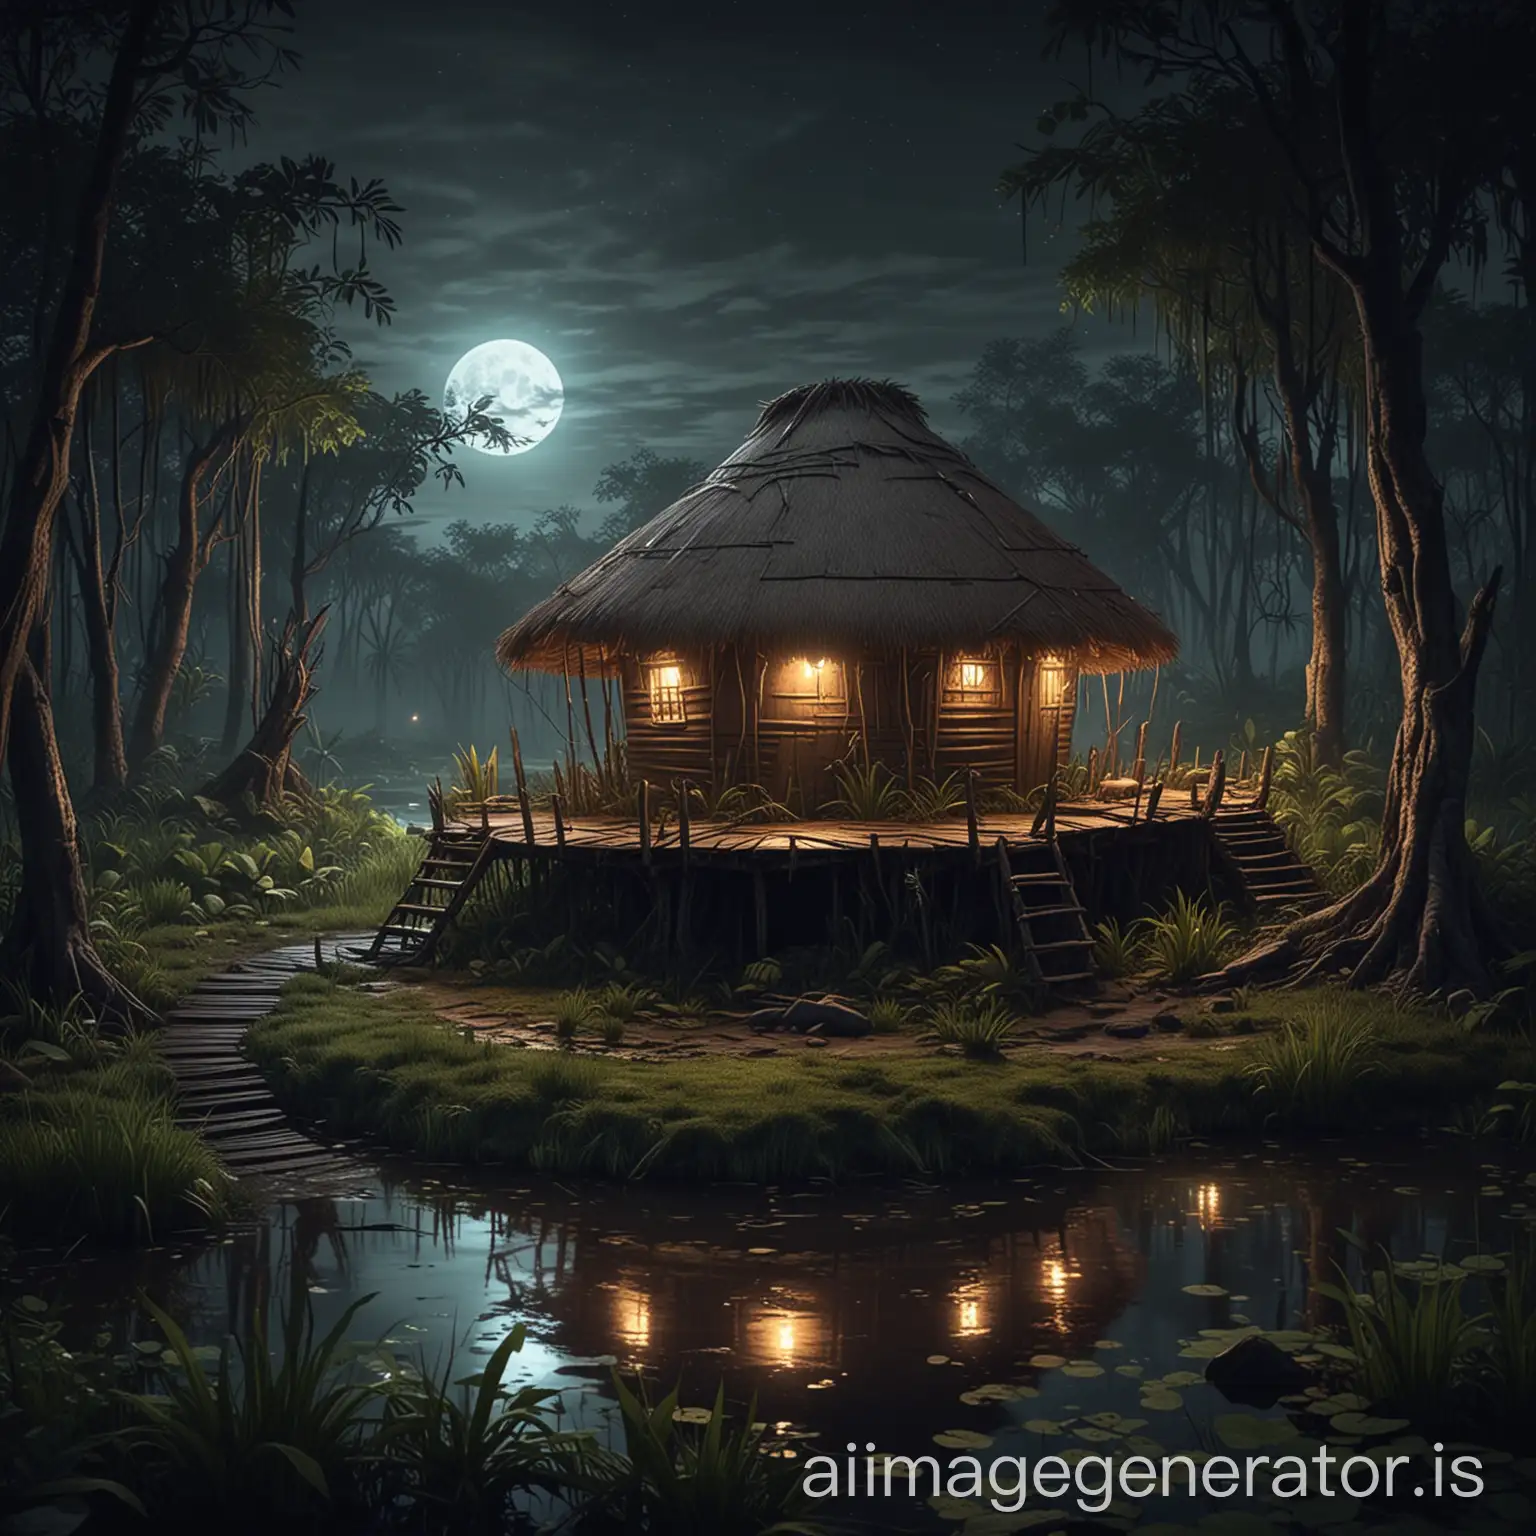 Create an tribal round hut above a swamp in night time dynamic illustration